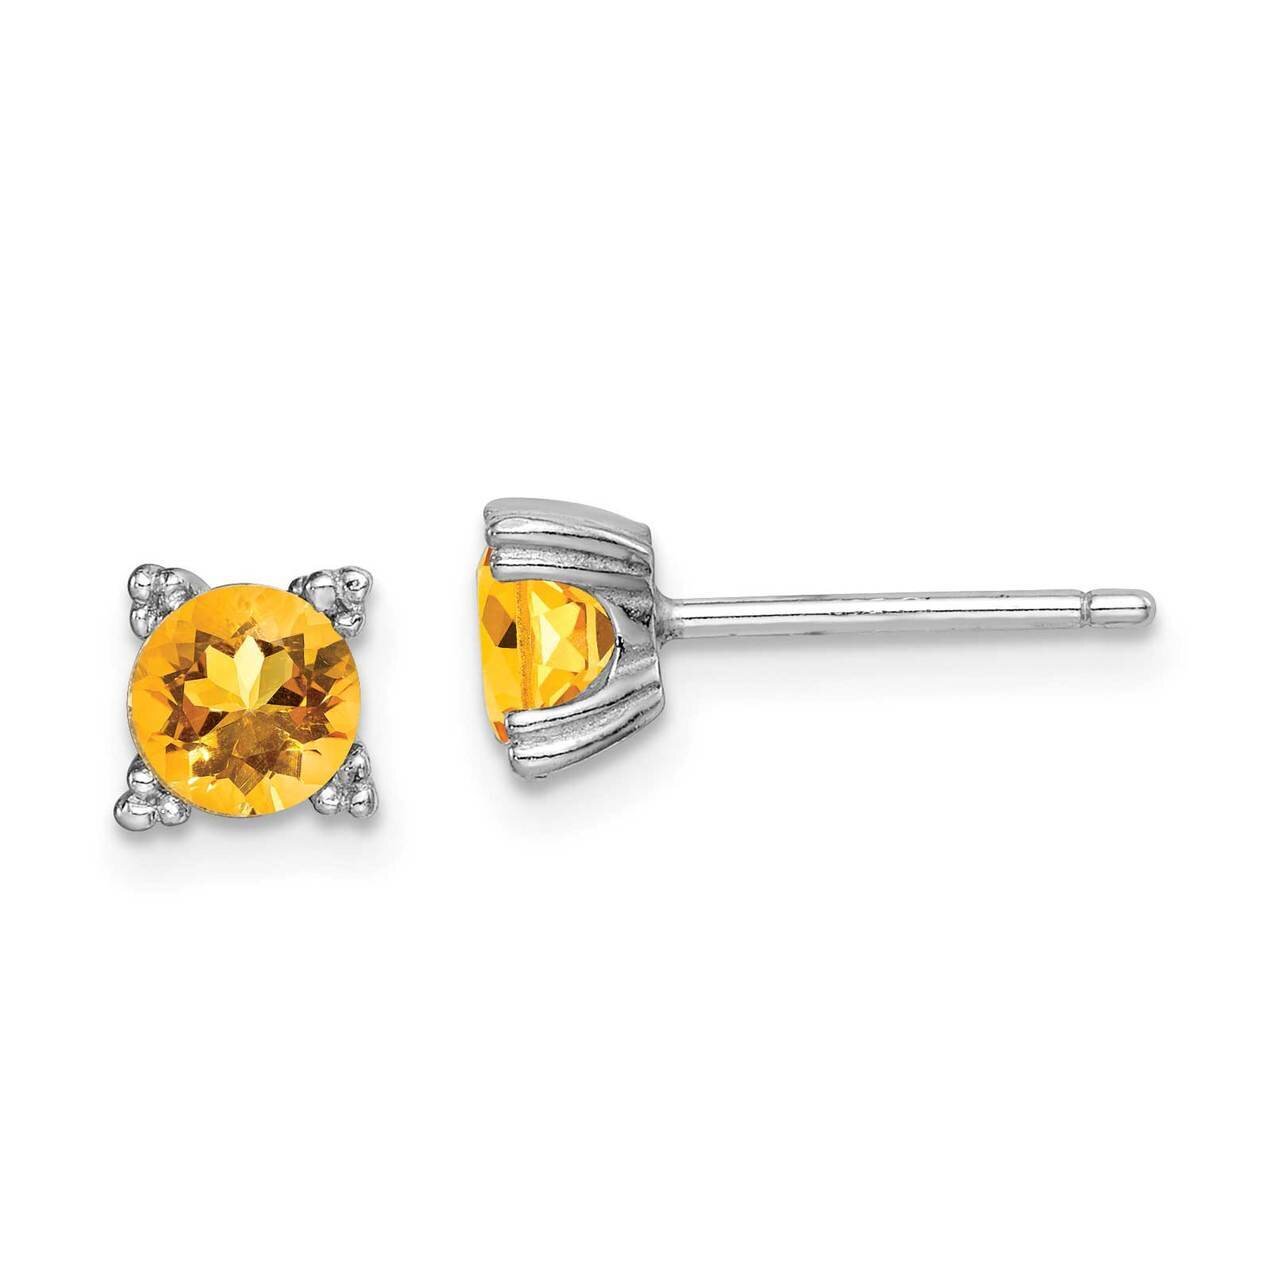 Round 5mm Citrine Post Earrings Sterling Silver Rhodium-plated QE15141CI